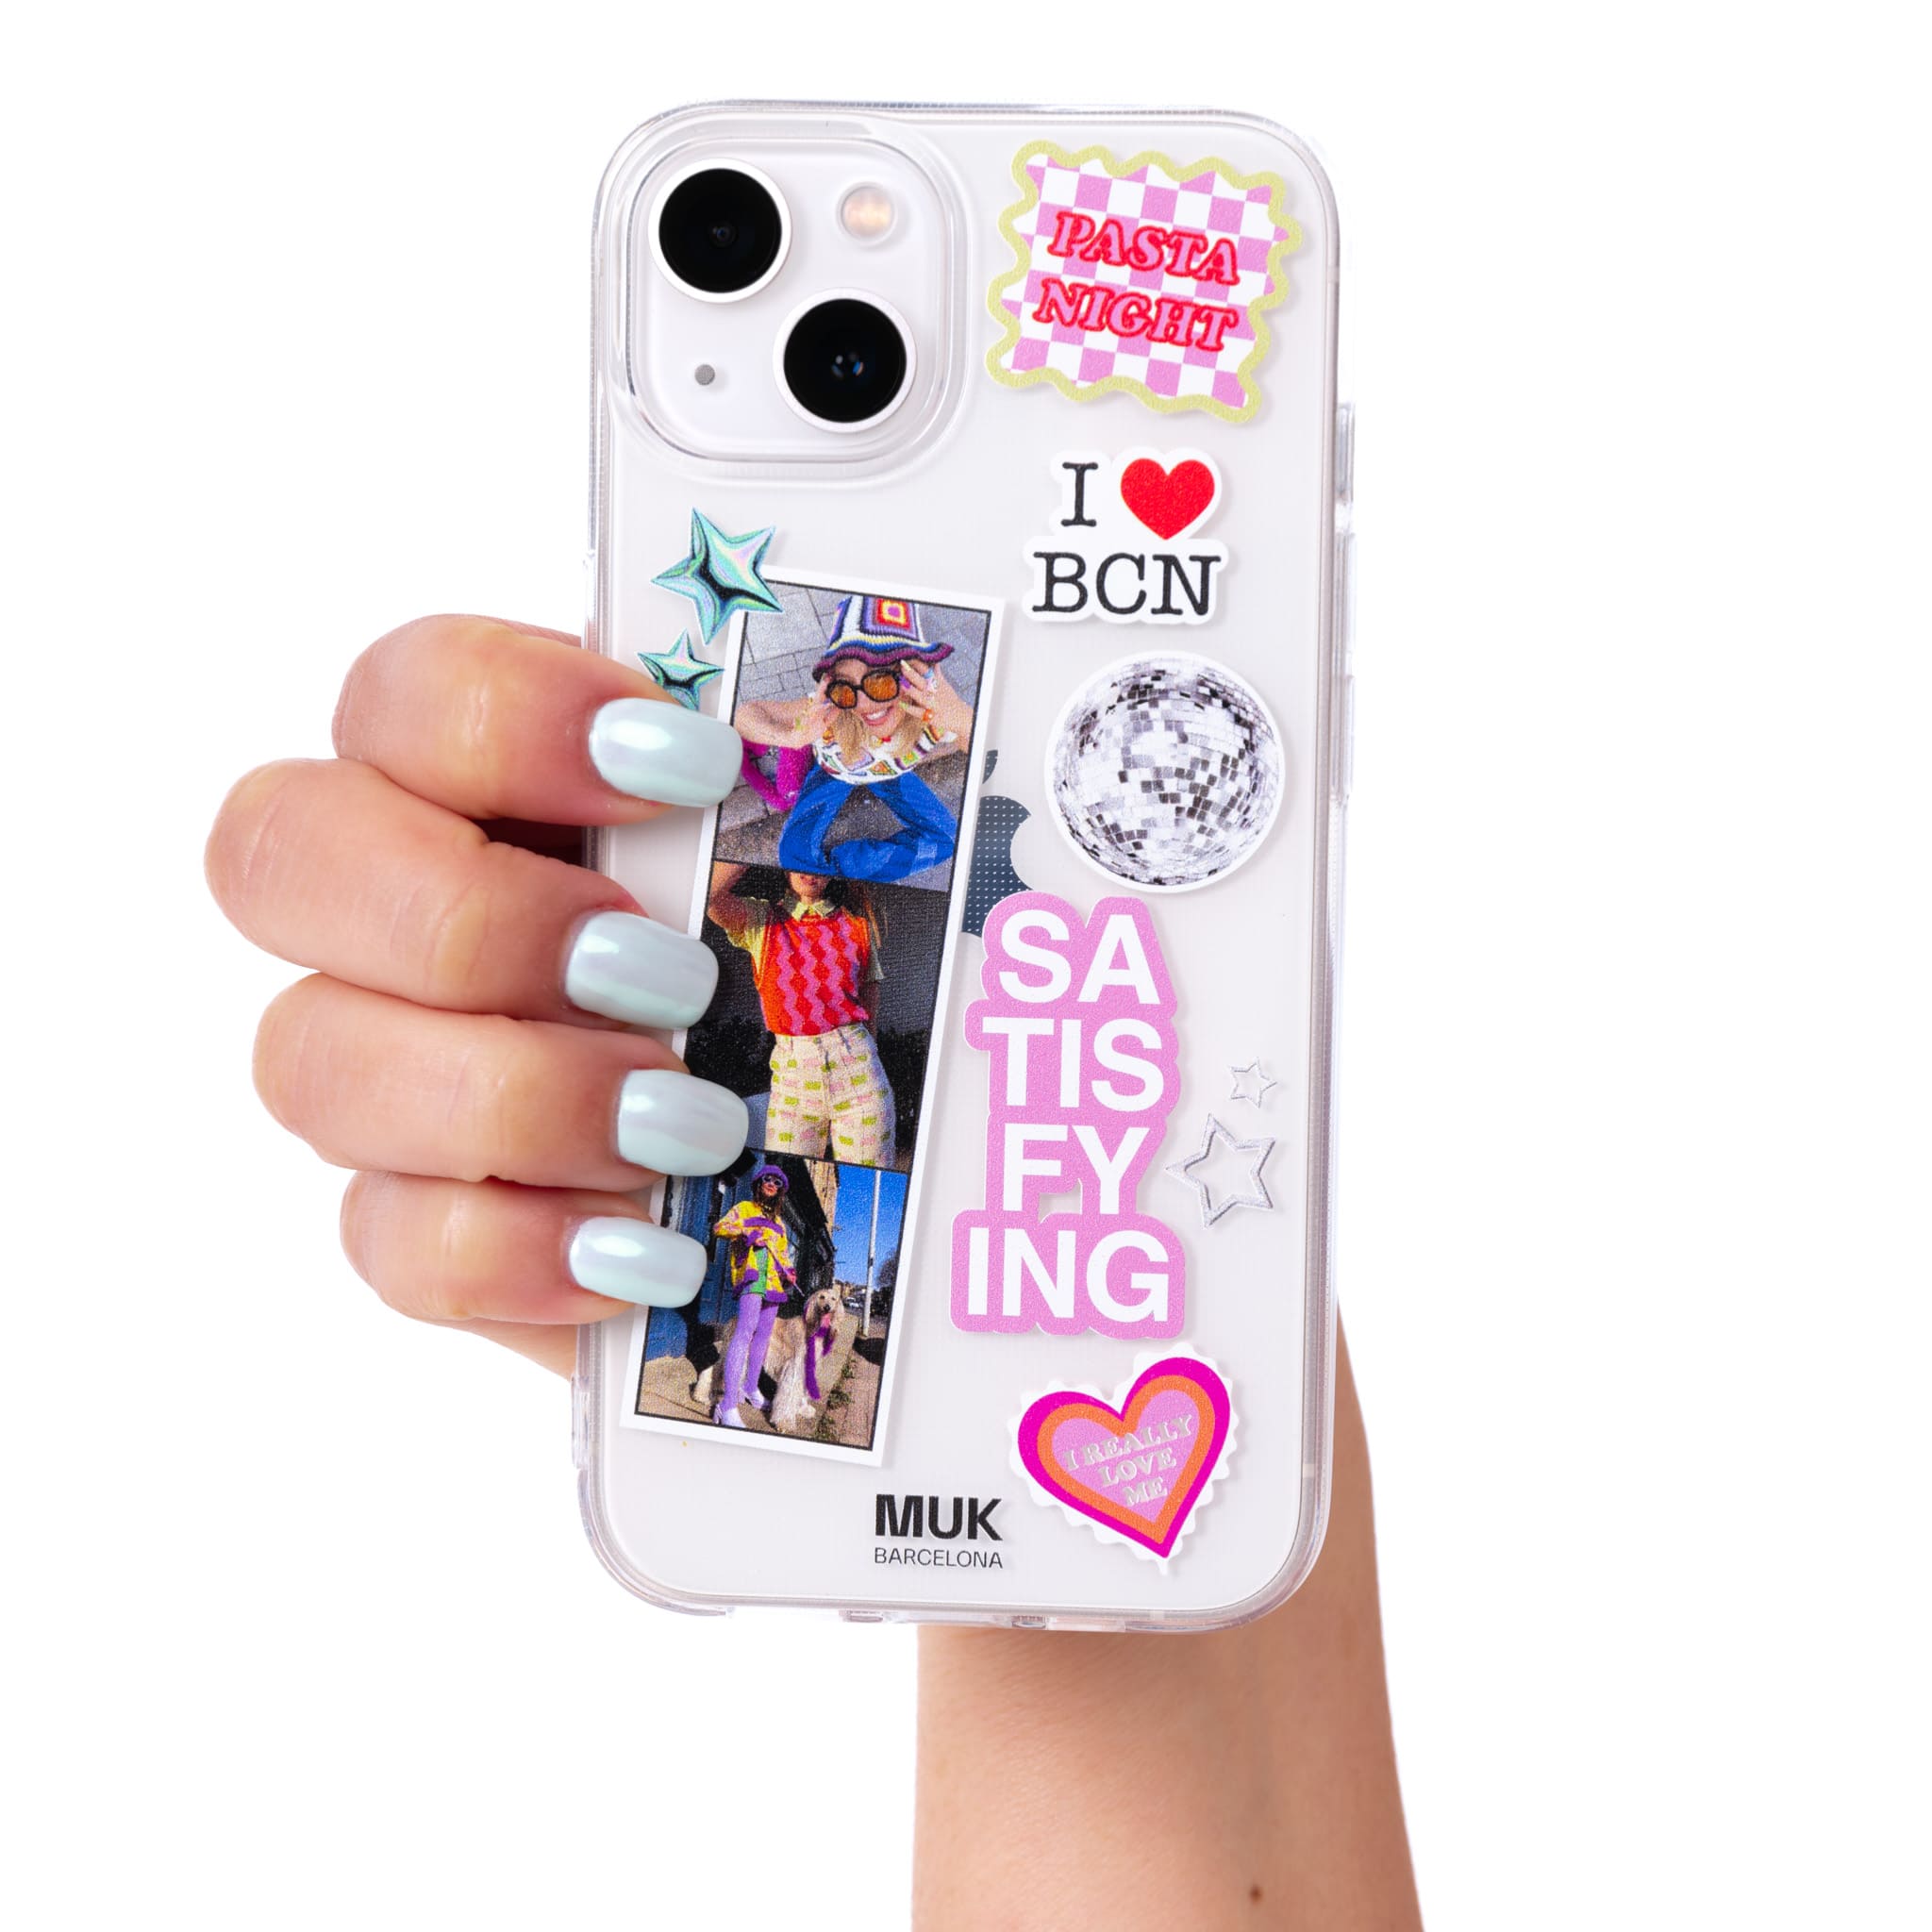 Clear aesthetic stickers Phone Case with 3 personalized photos.
